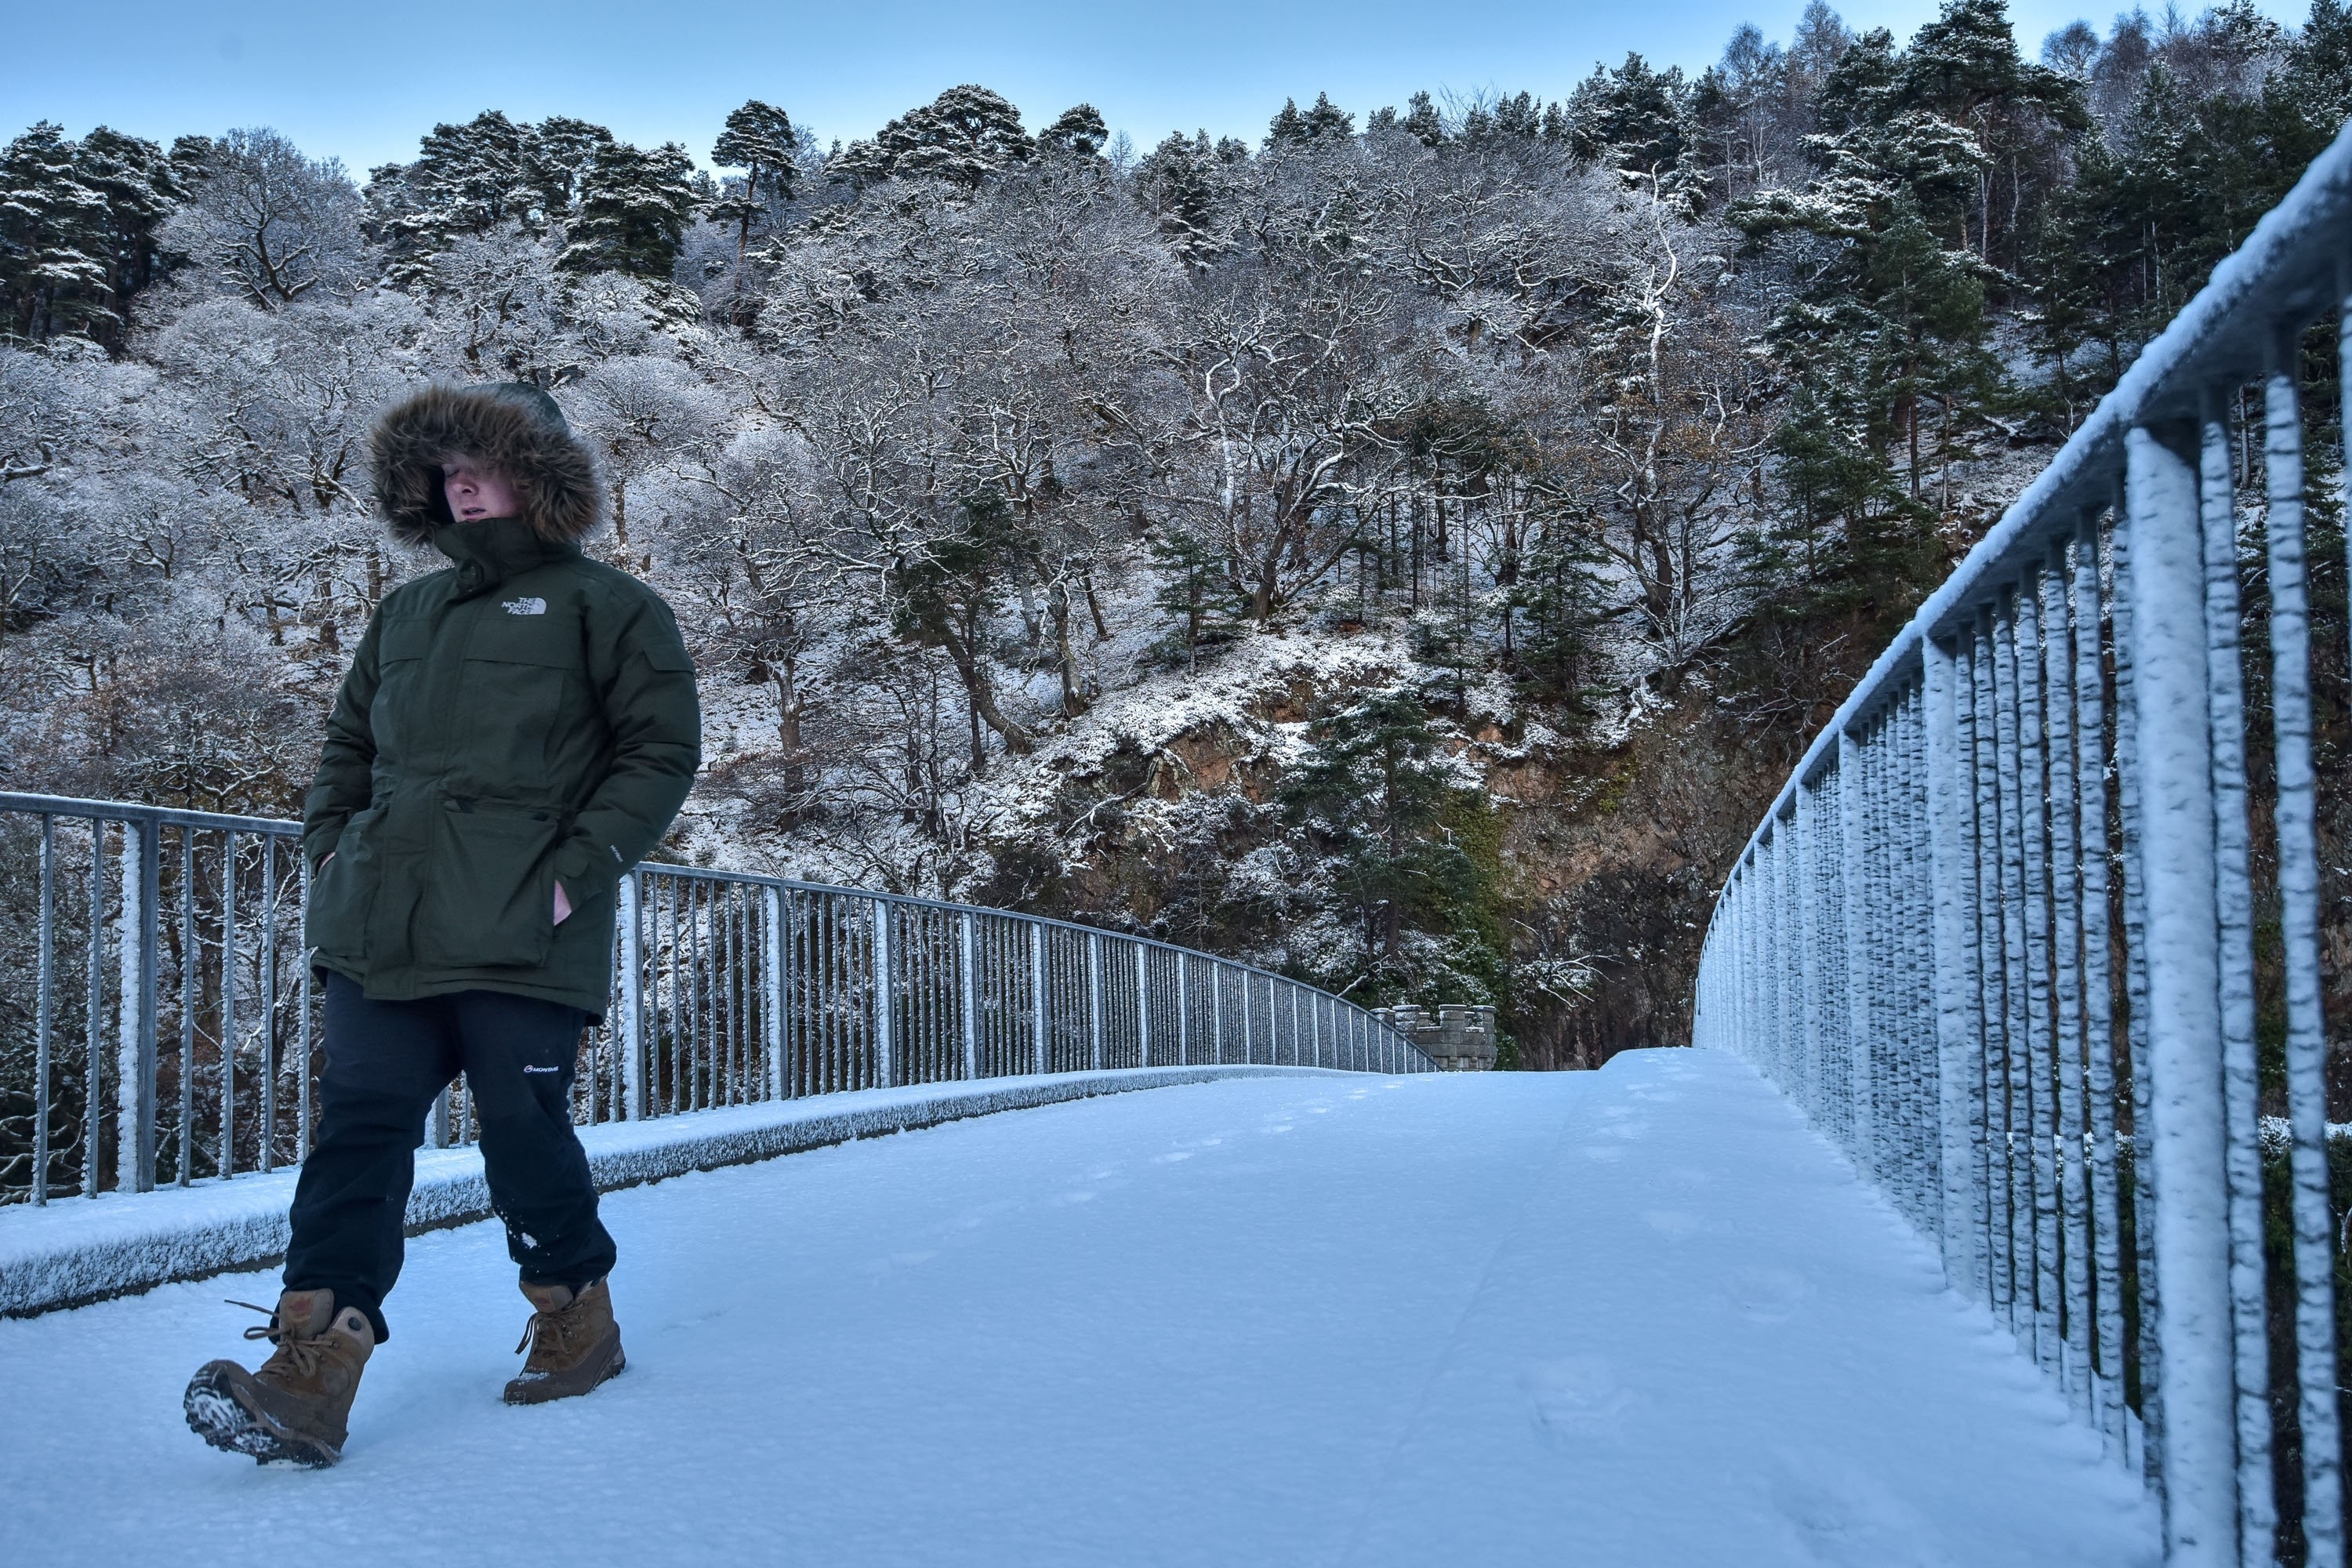 A man walks through snow on the Craigellachie Bridge in Craigellachie, Moray on November 30 2015. Storm Clodagh has brought high winds and snow showers which covered the north of Scotland.